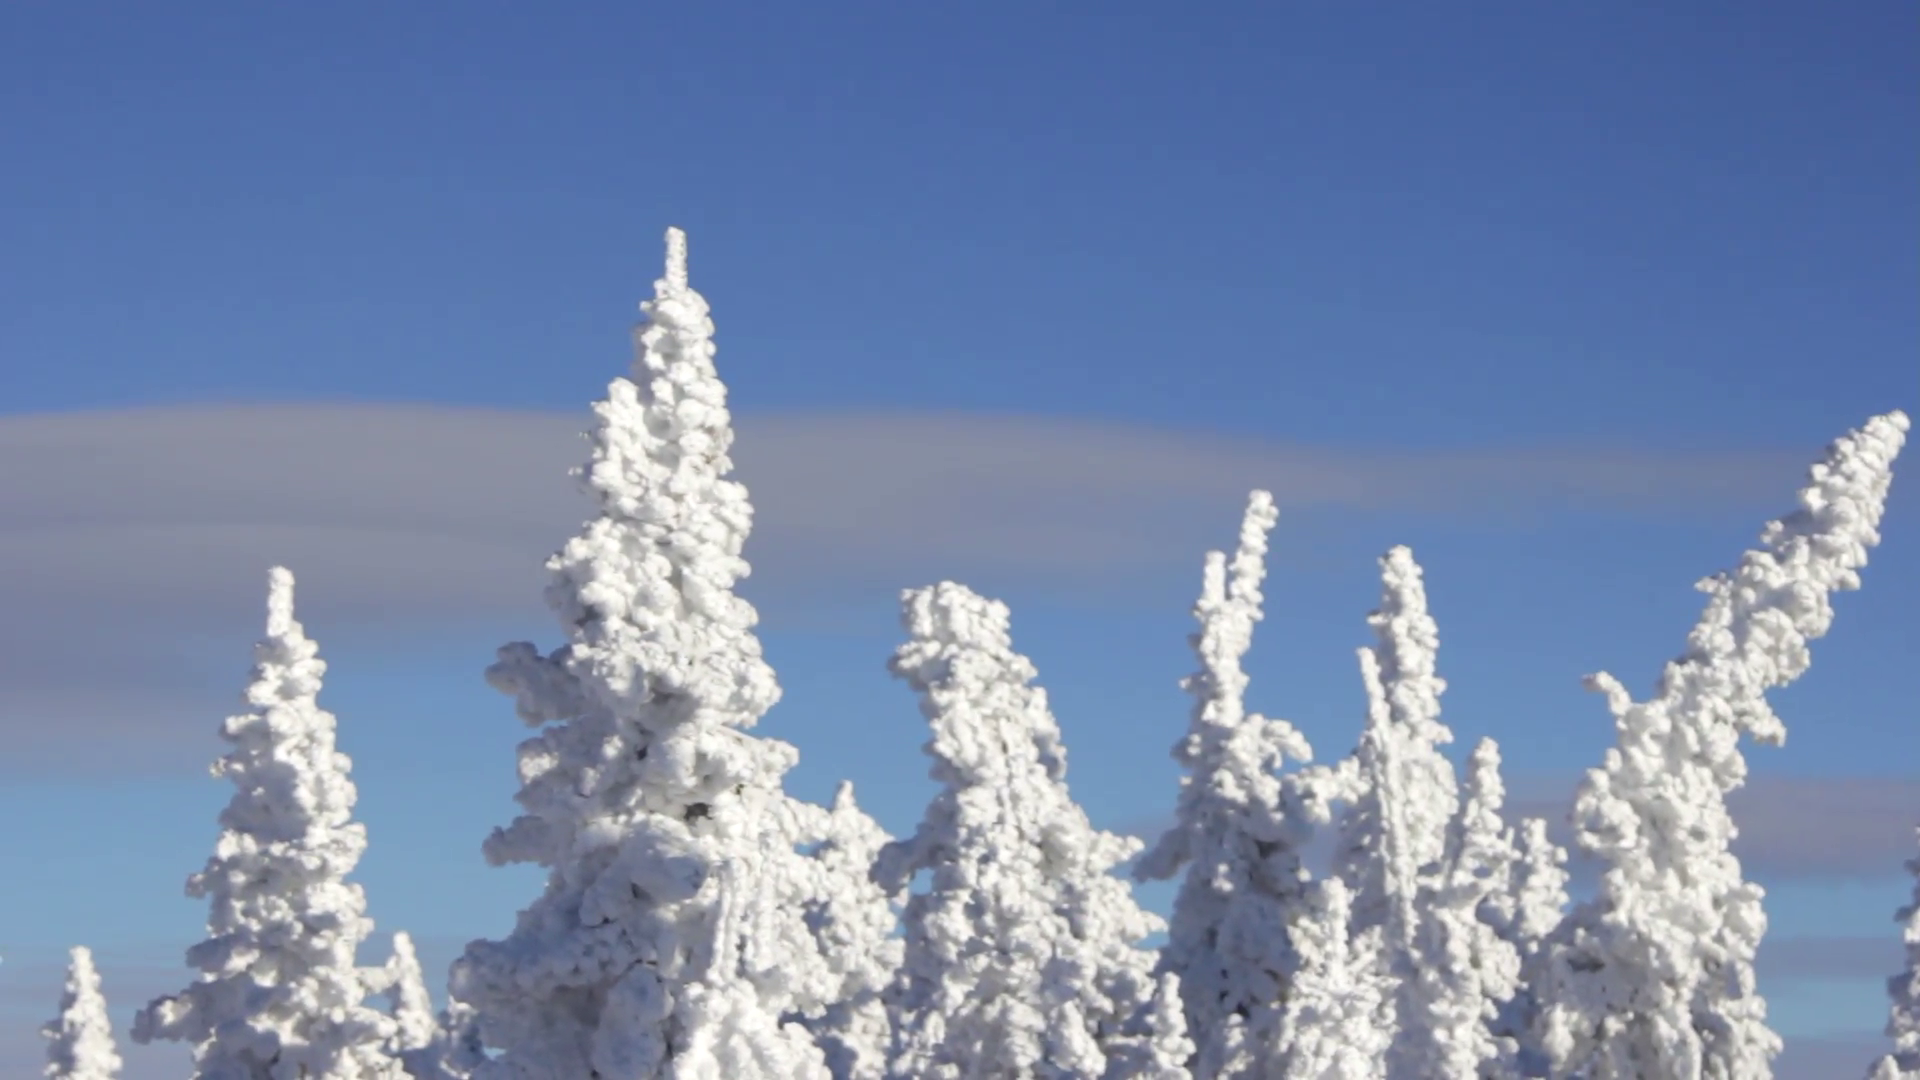 Christmas Trees Covered in Snow on Mountain Top, Sunny Weather, Blue ...